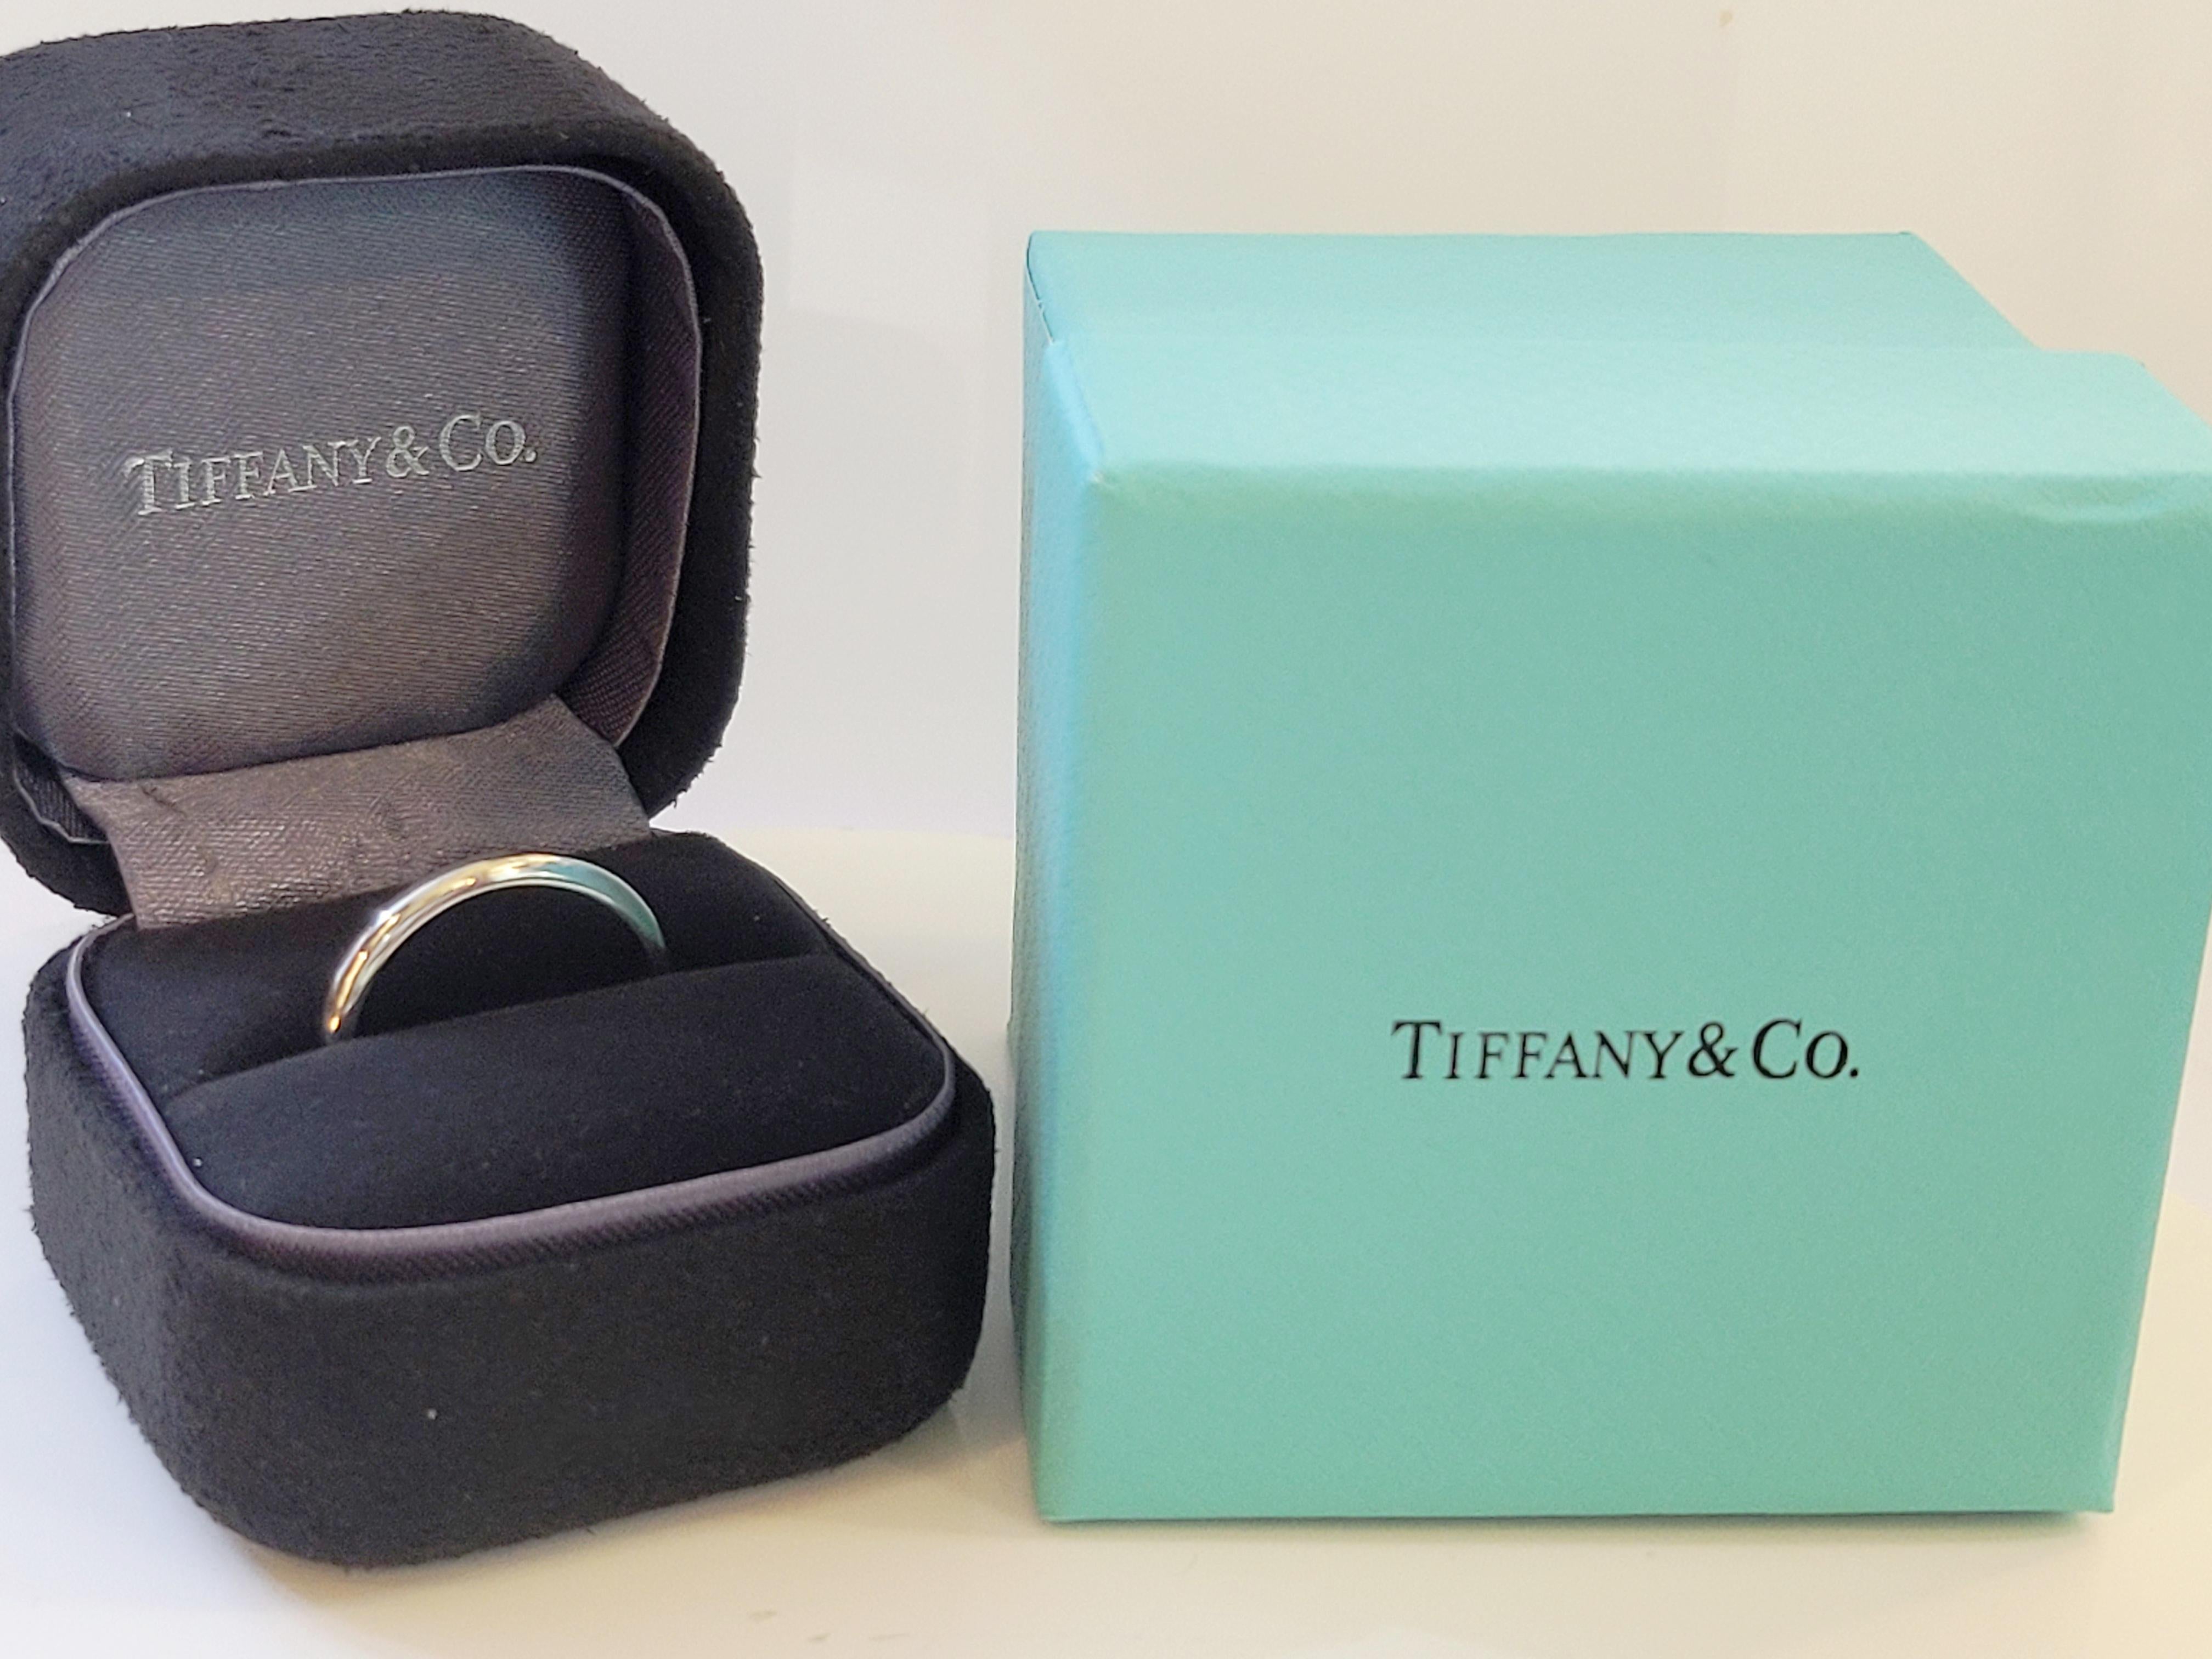 Peretti  Tiffany & co
Wedding ring 
Mint condition
Platinum 950
Gender women
Ring size 6.5
length 20.2 
width 2.2 
Weight 4.0gr